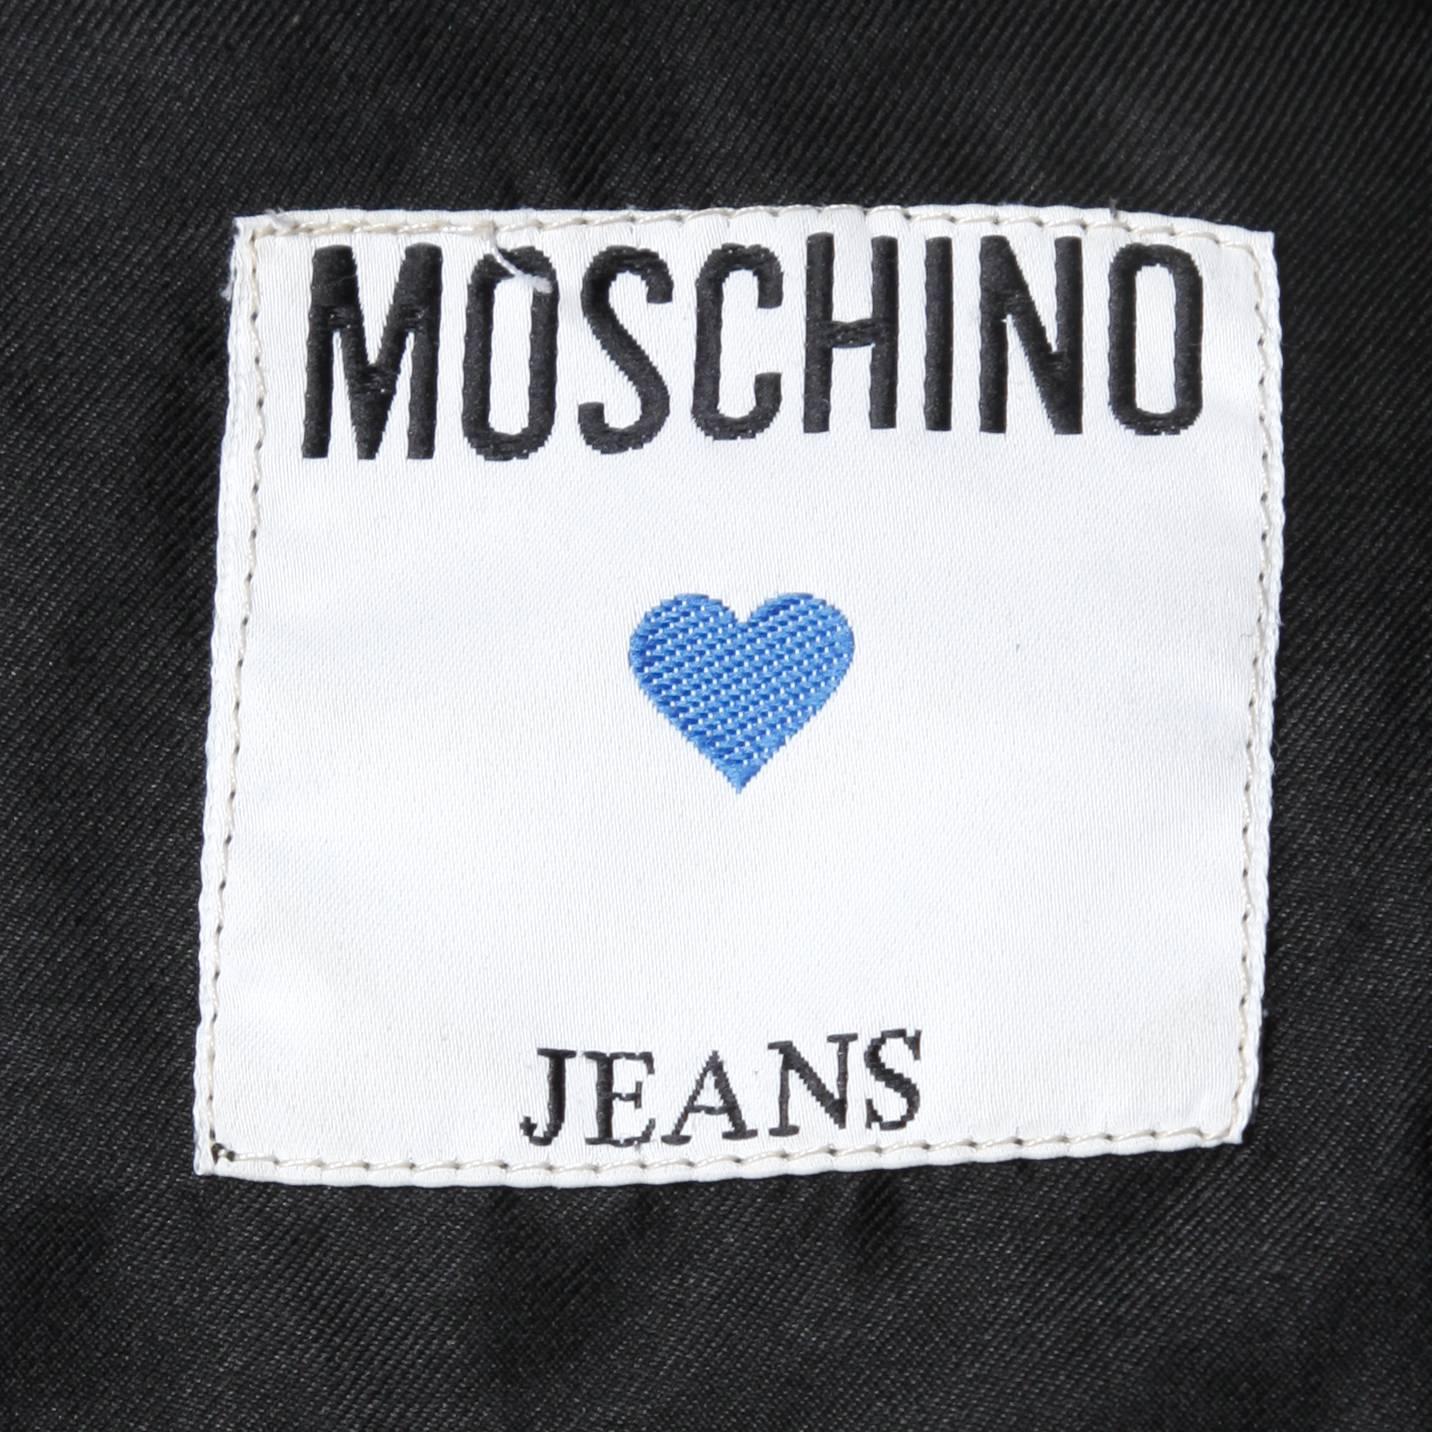 Moschino Vintage Quilted Denim Biker Jacket with Bottle Cap Appliques In Excellent Condition For Sale In Sparks, NV